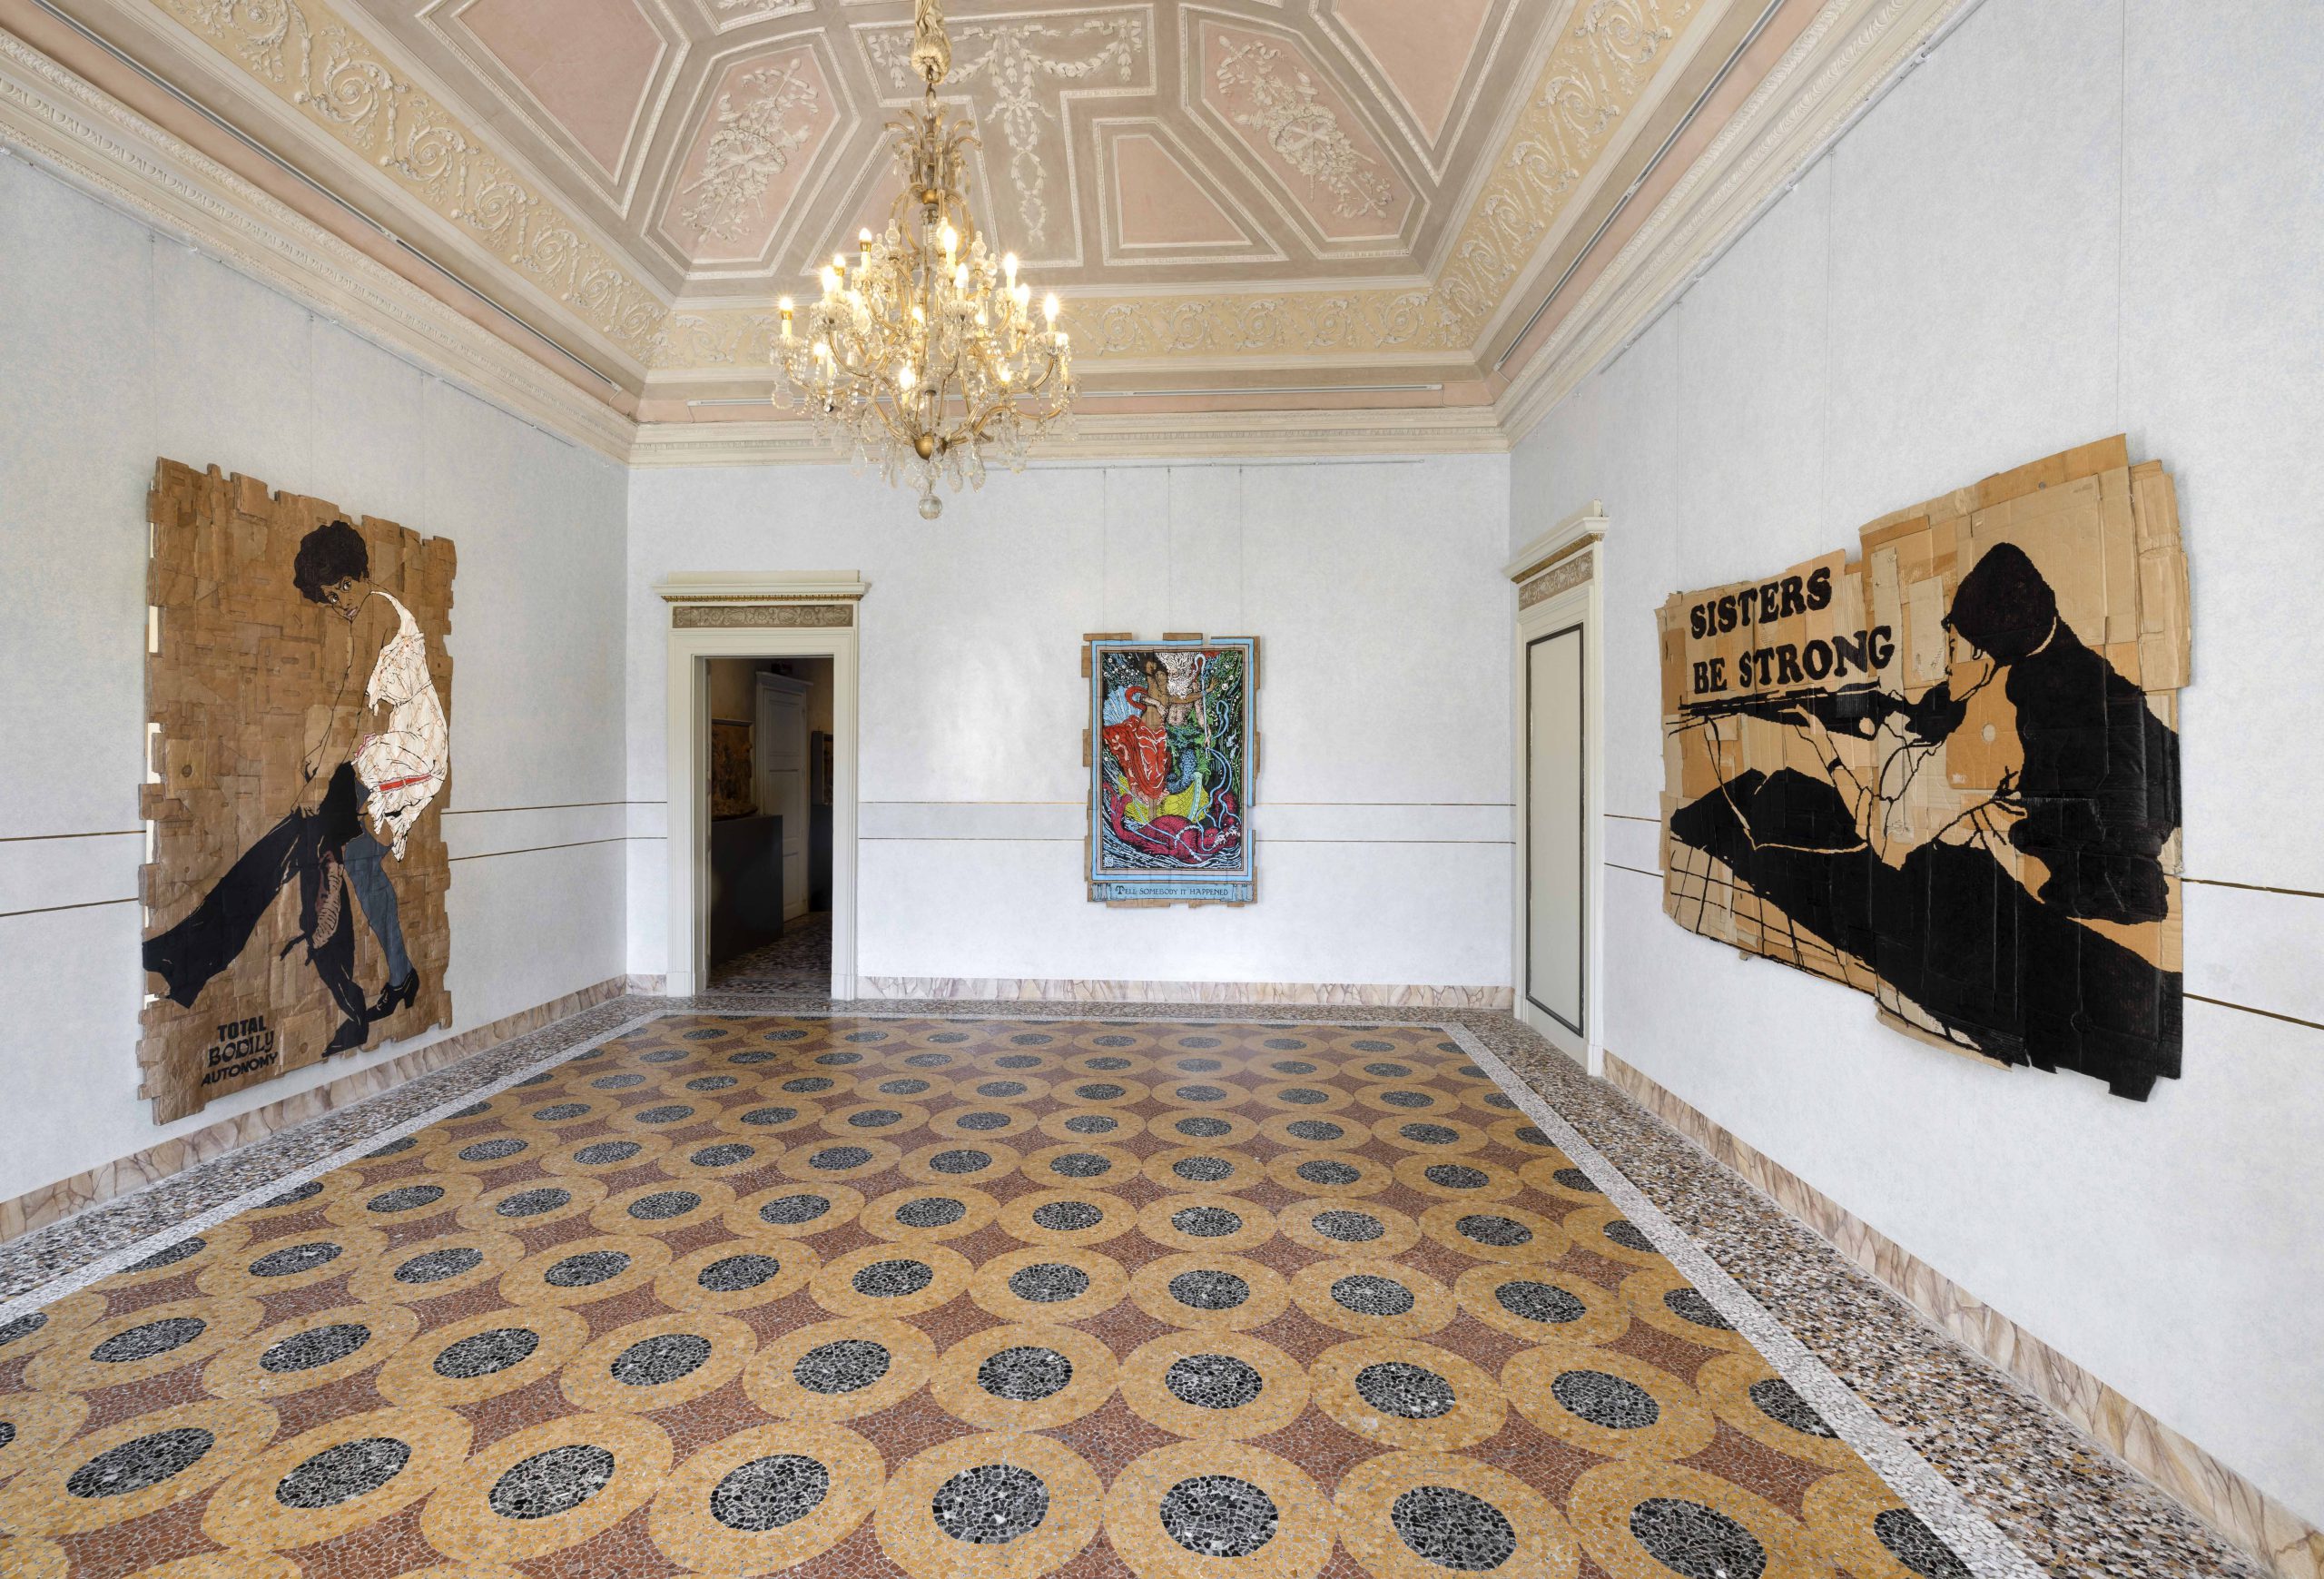 Andrea Bowers. Moving in Space without Asking Permission, 2022, installation view. Ph. Andrea Rossetti. Courtesy Fondazione Furla